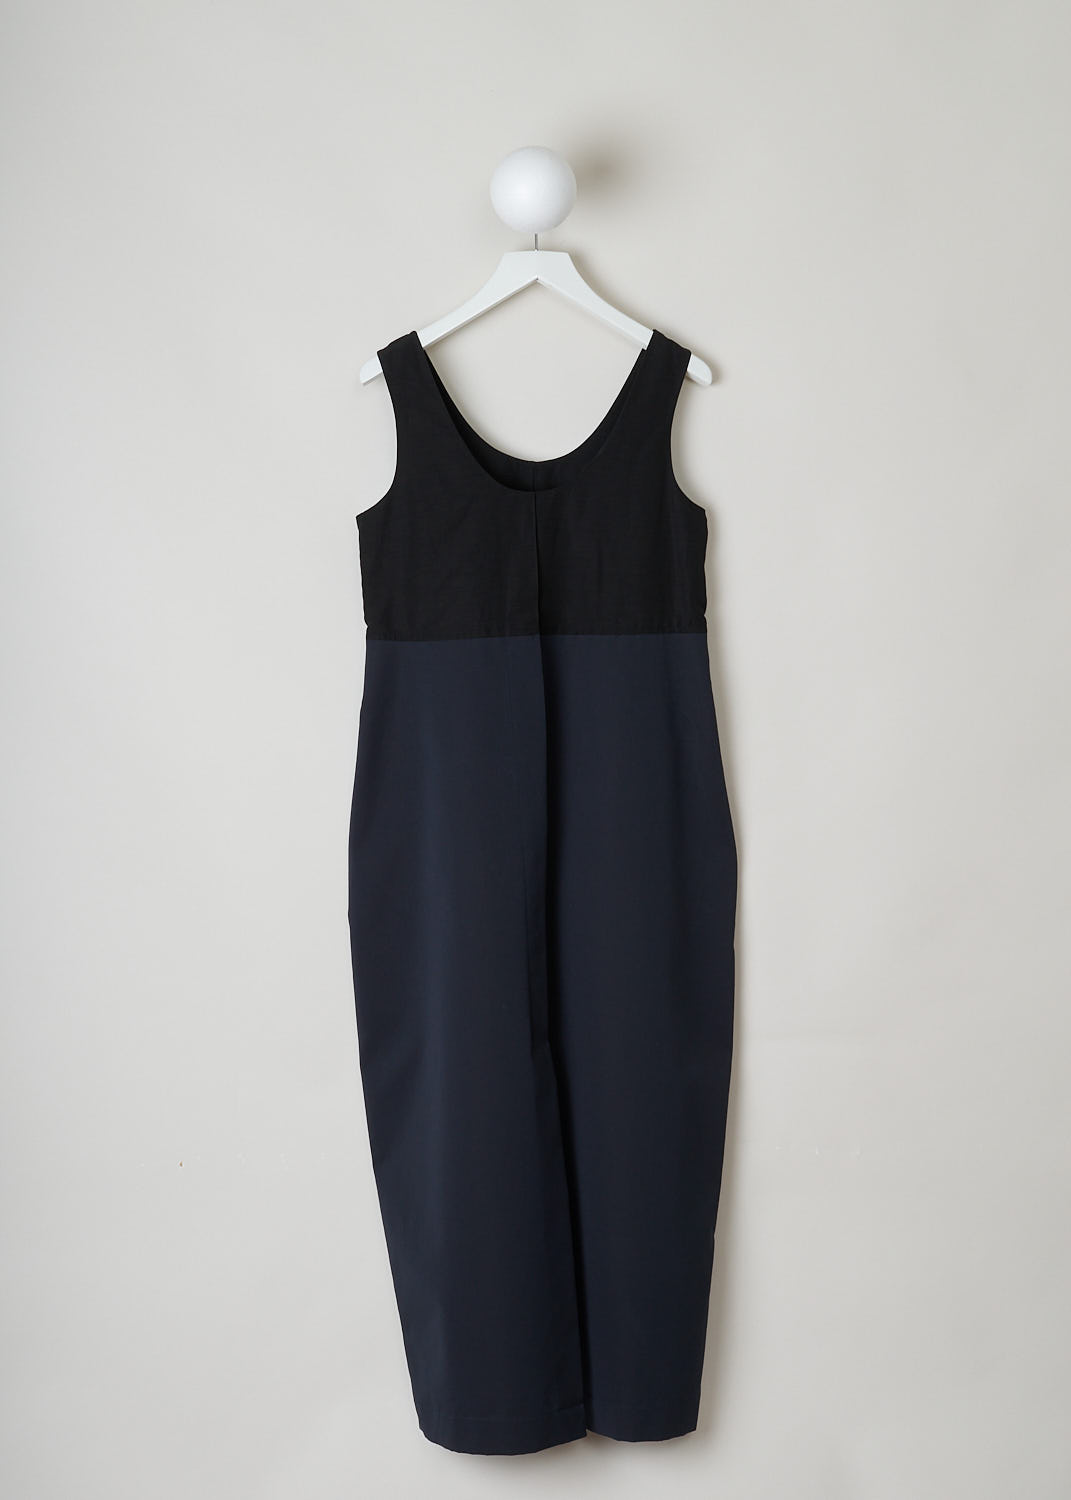 JIL SANDER, TWO-TONE SHIFT DRESS, JSWO507756_WO251400C_402, Black, Blue, Back, This two-tone sleeveless dress has an empire style silhouette with a black bodice and an elongated dark blue skirt. Slant pockets are concealed in in the side seam. In the back, a centre slit can be found. 
